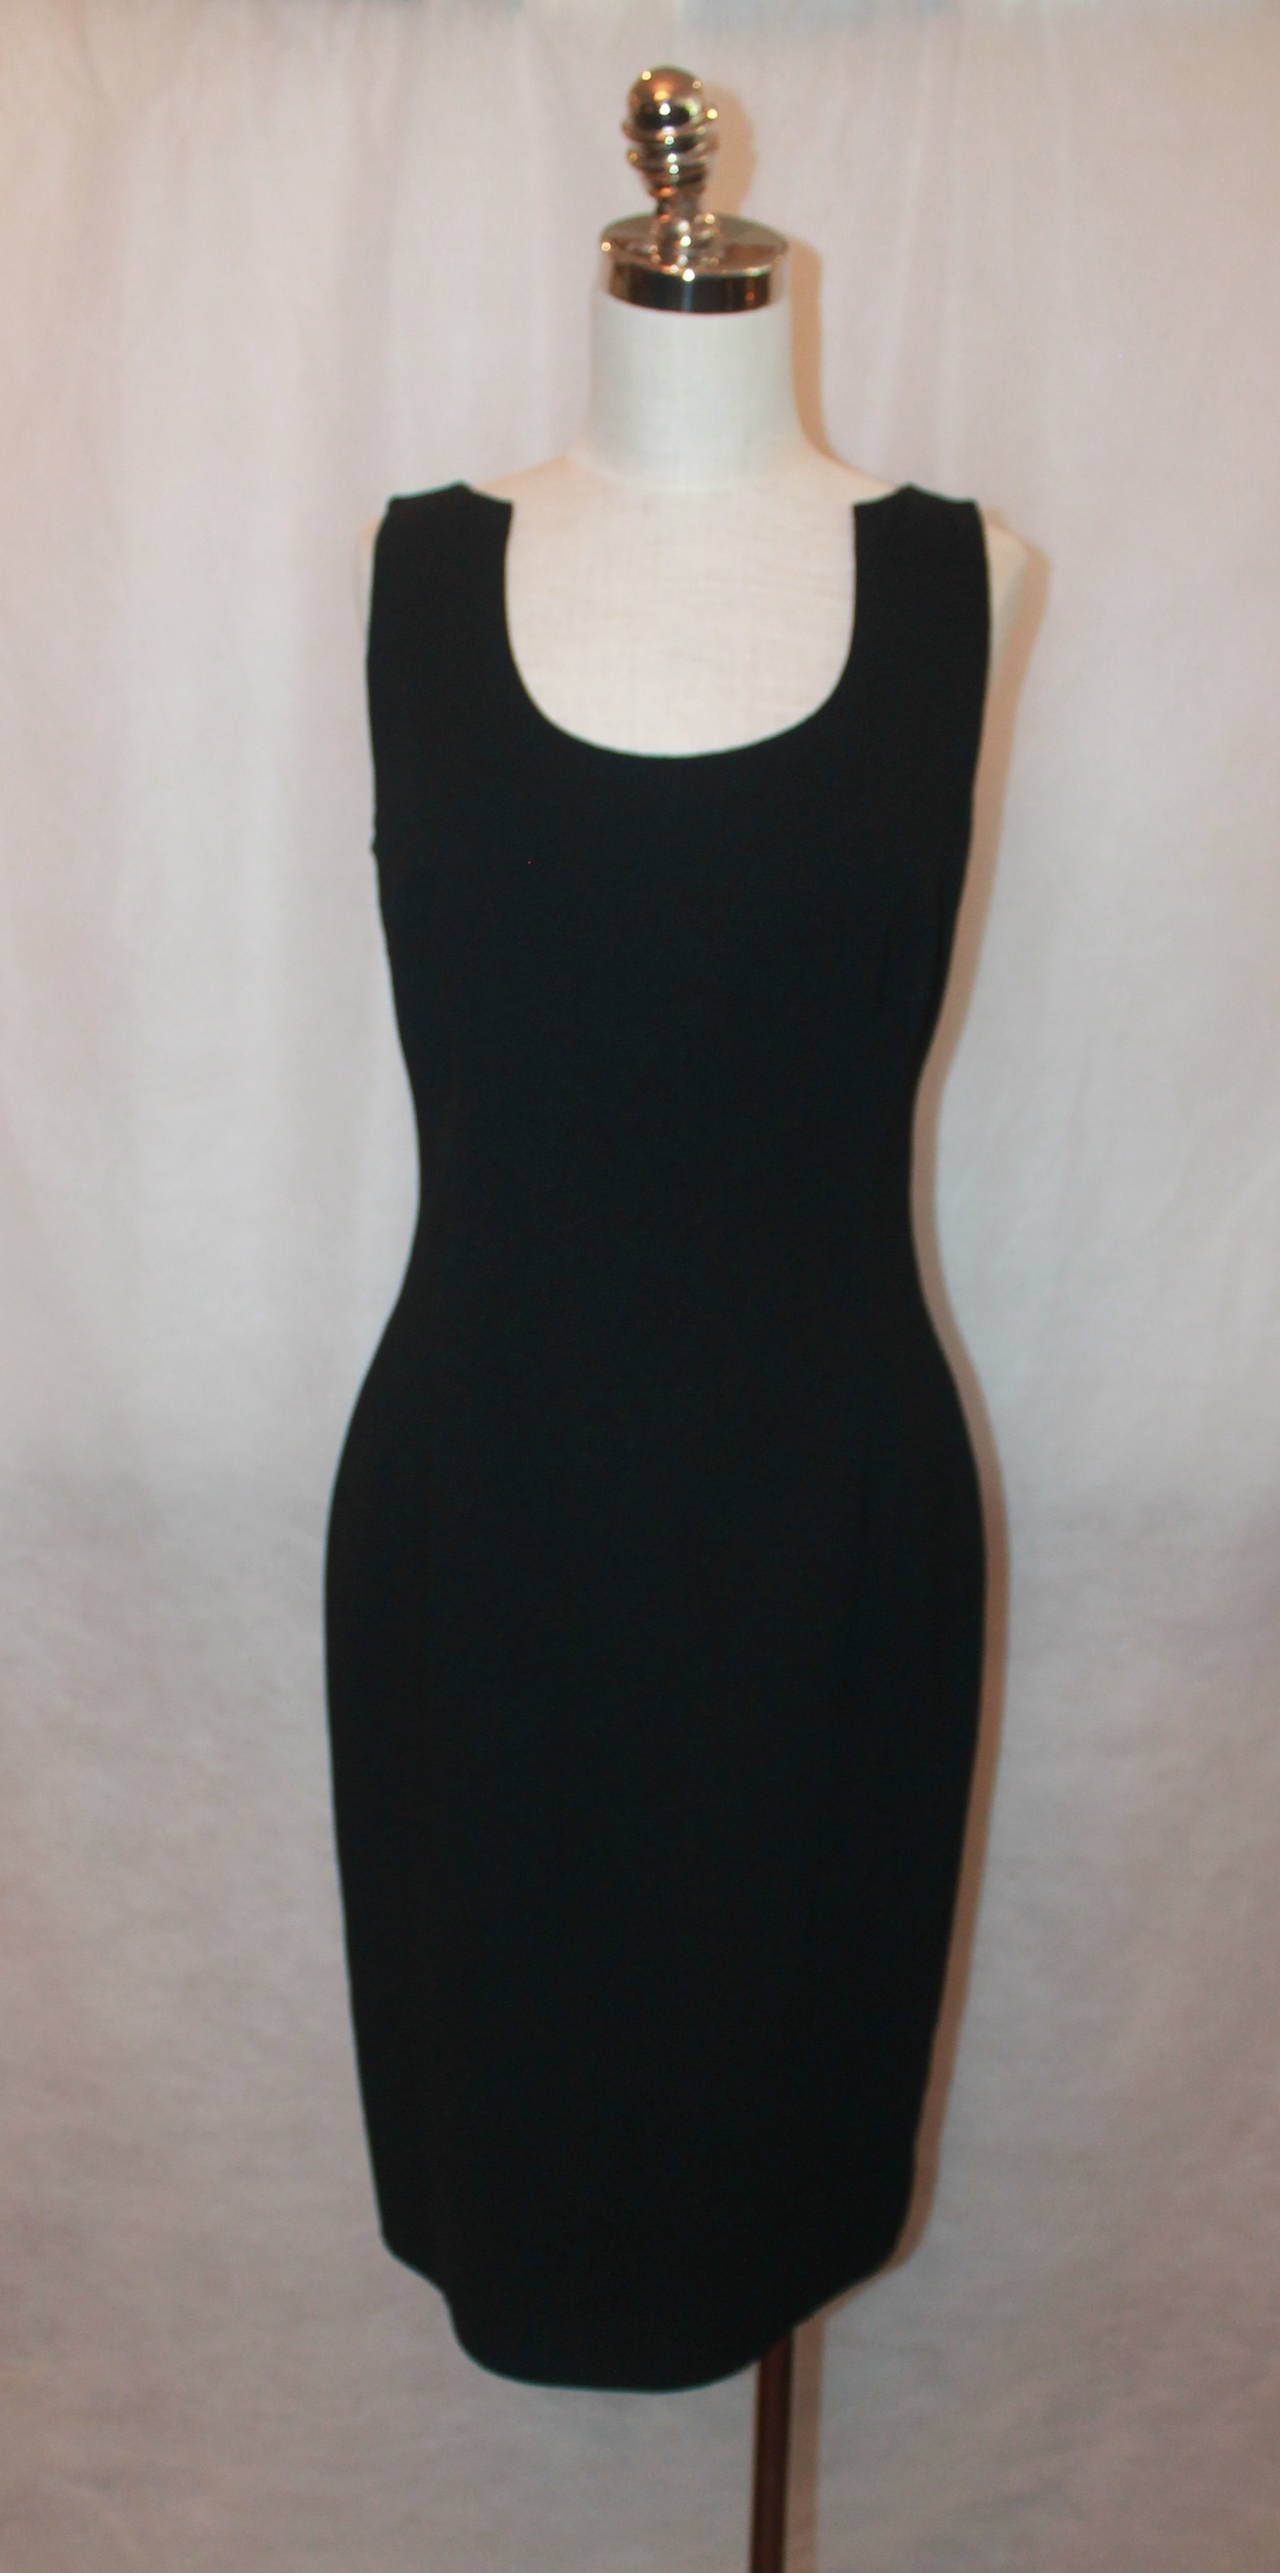 Chado (Ralph Rucci Black and White Label) Black Wool Tapered Dress with Scooped Neckline. This Size 8 Dress is in Excellent Condition.

Measurements:
Bust: 36.5 